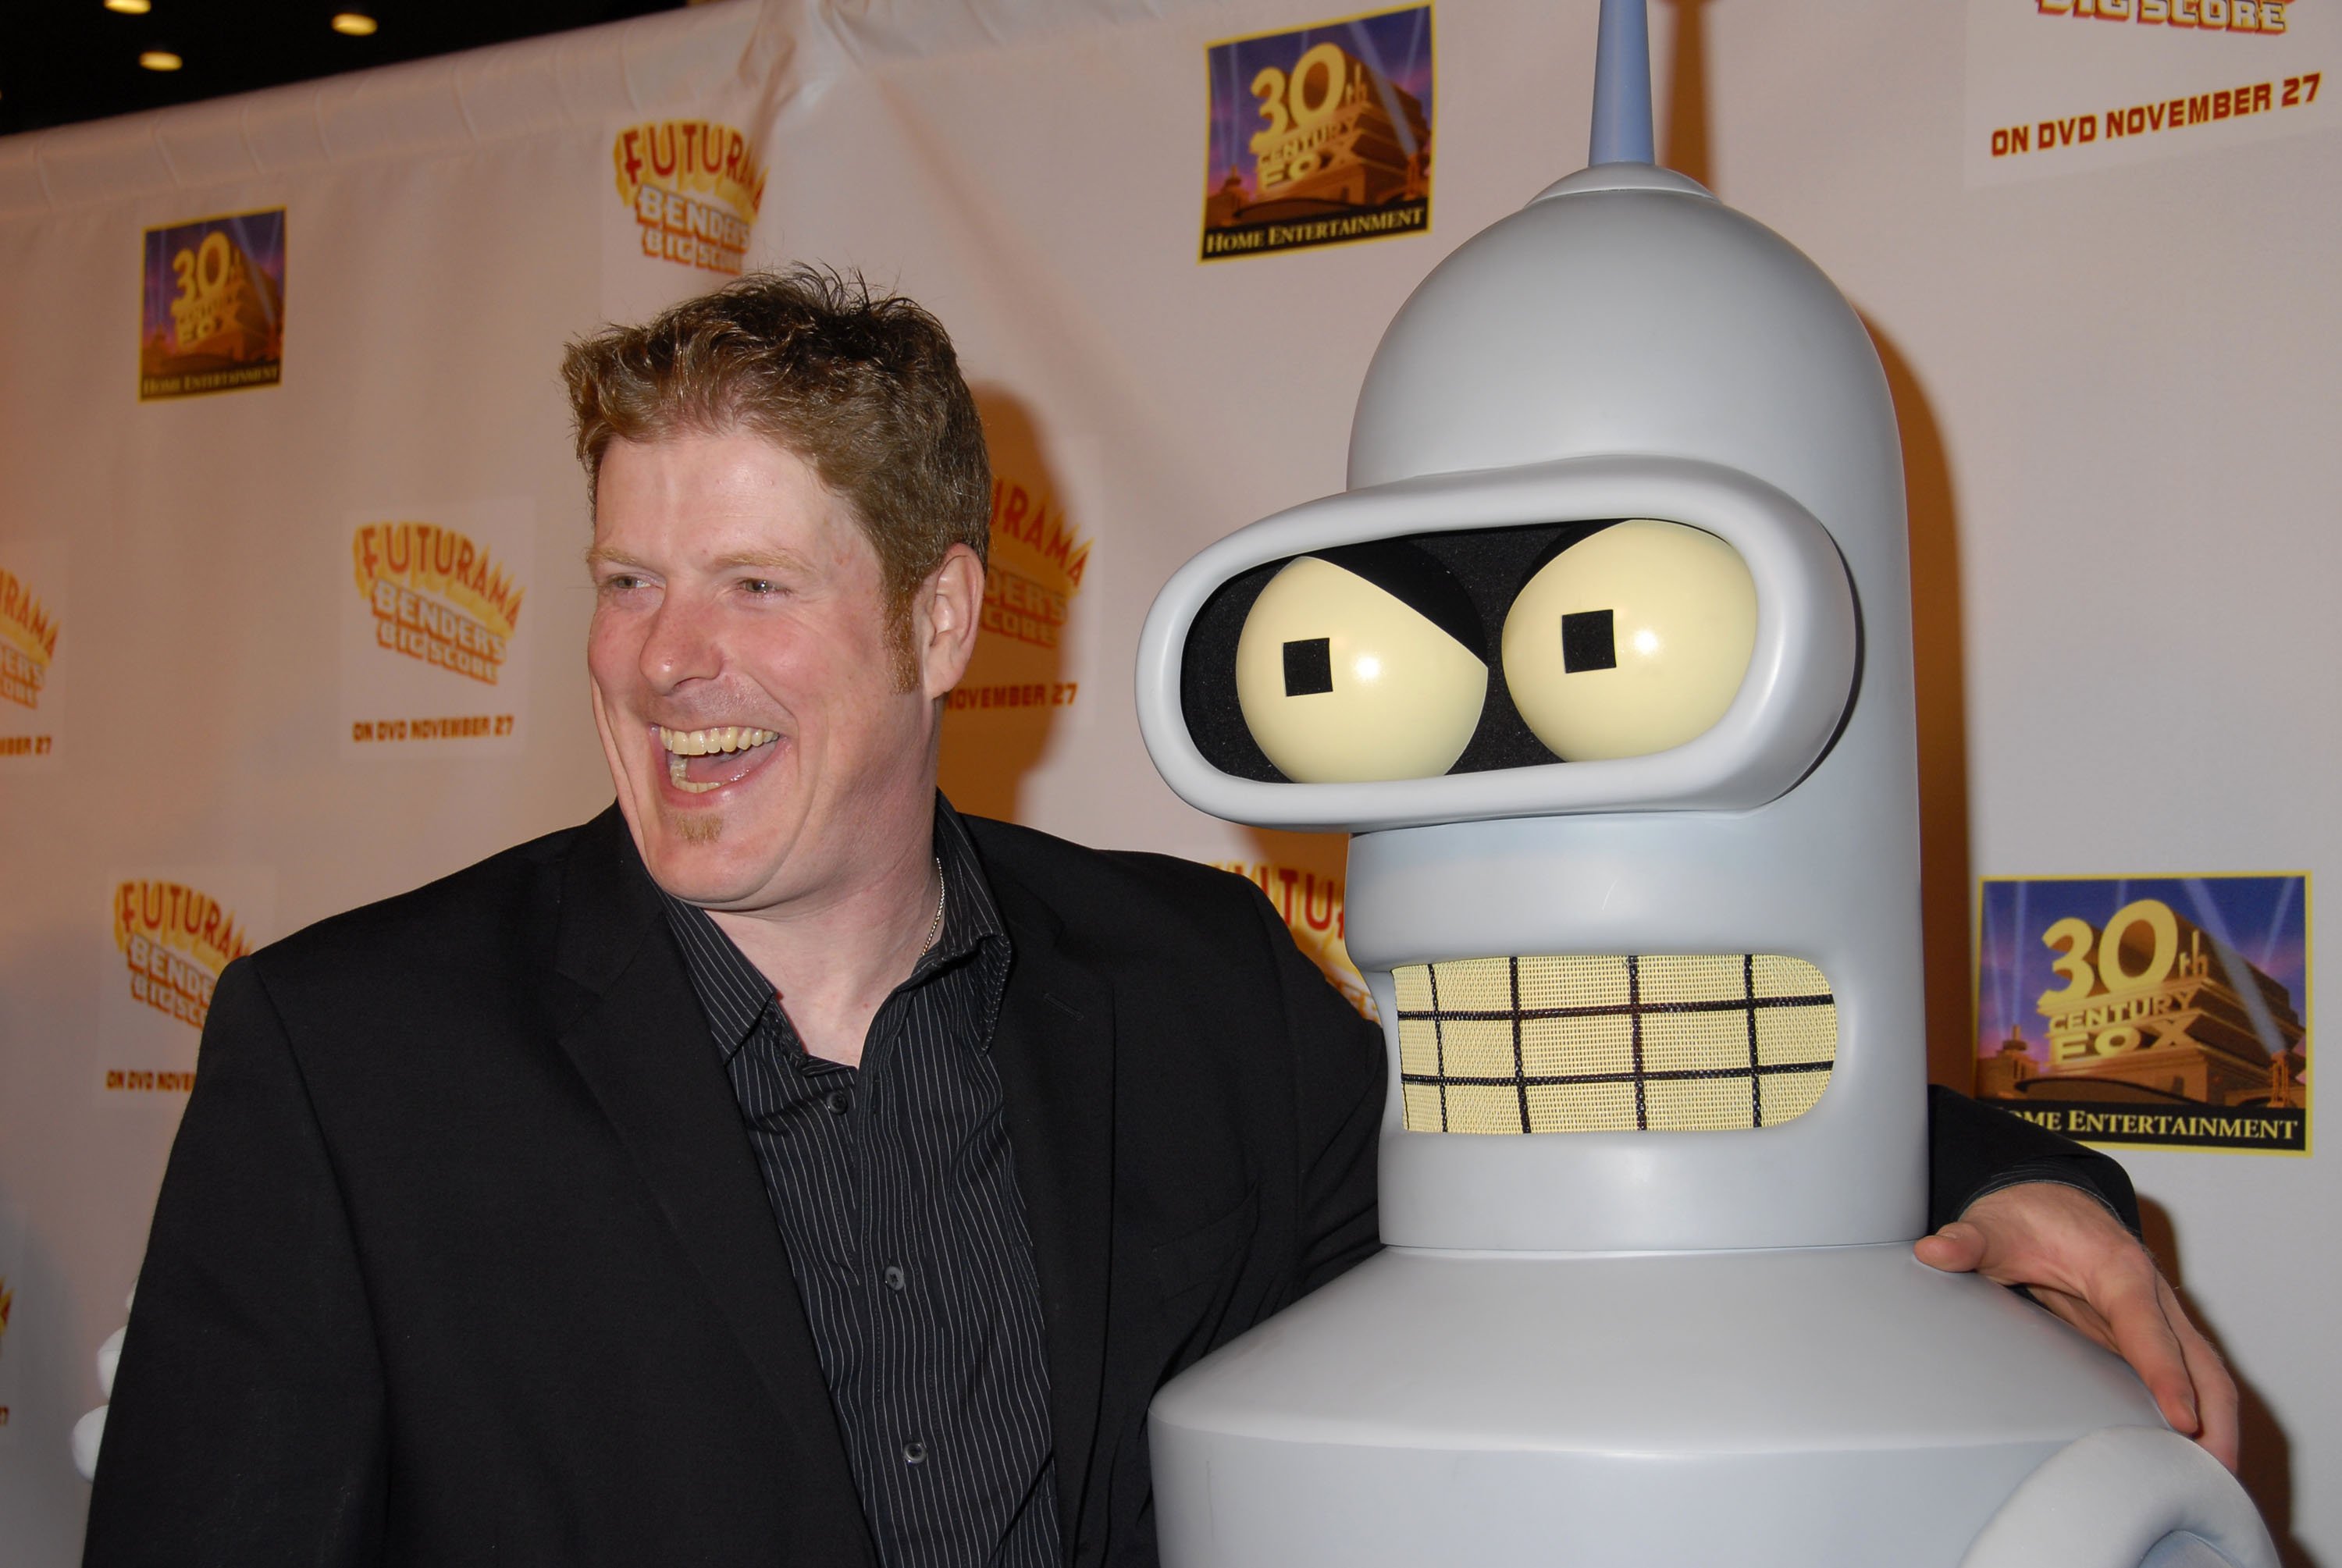 'Futurama' actor John DiMaggio poses with a mascot of his character Bender the robot.